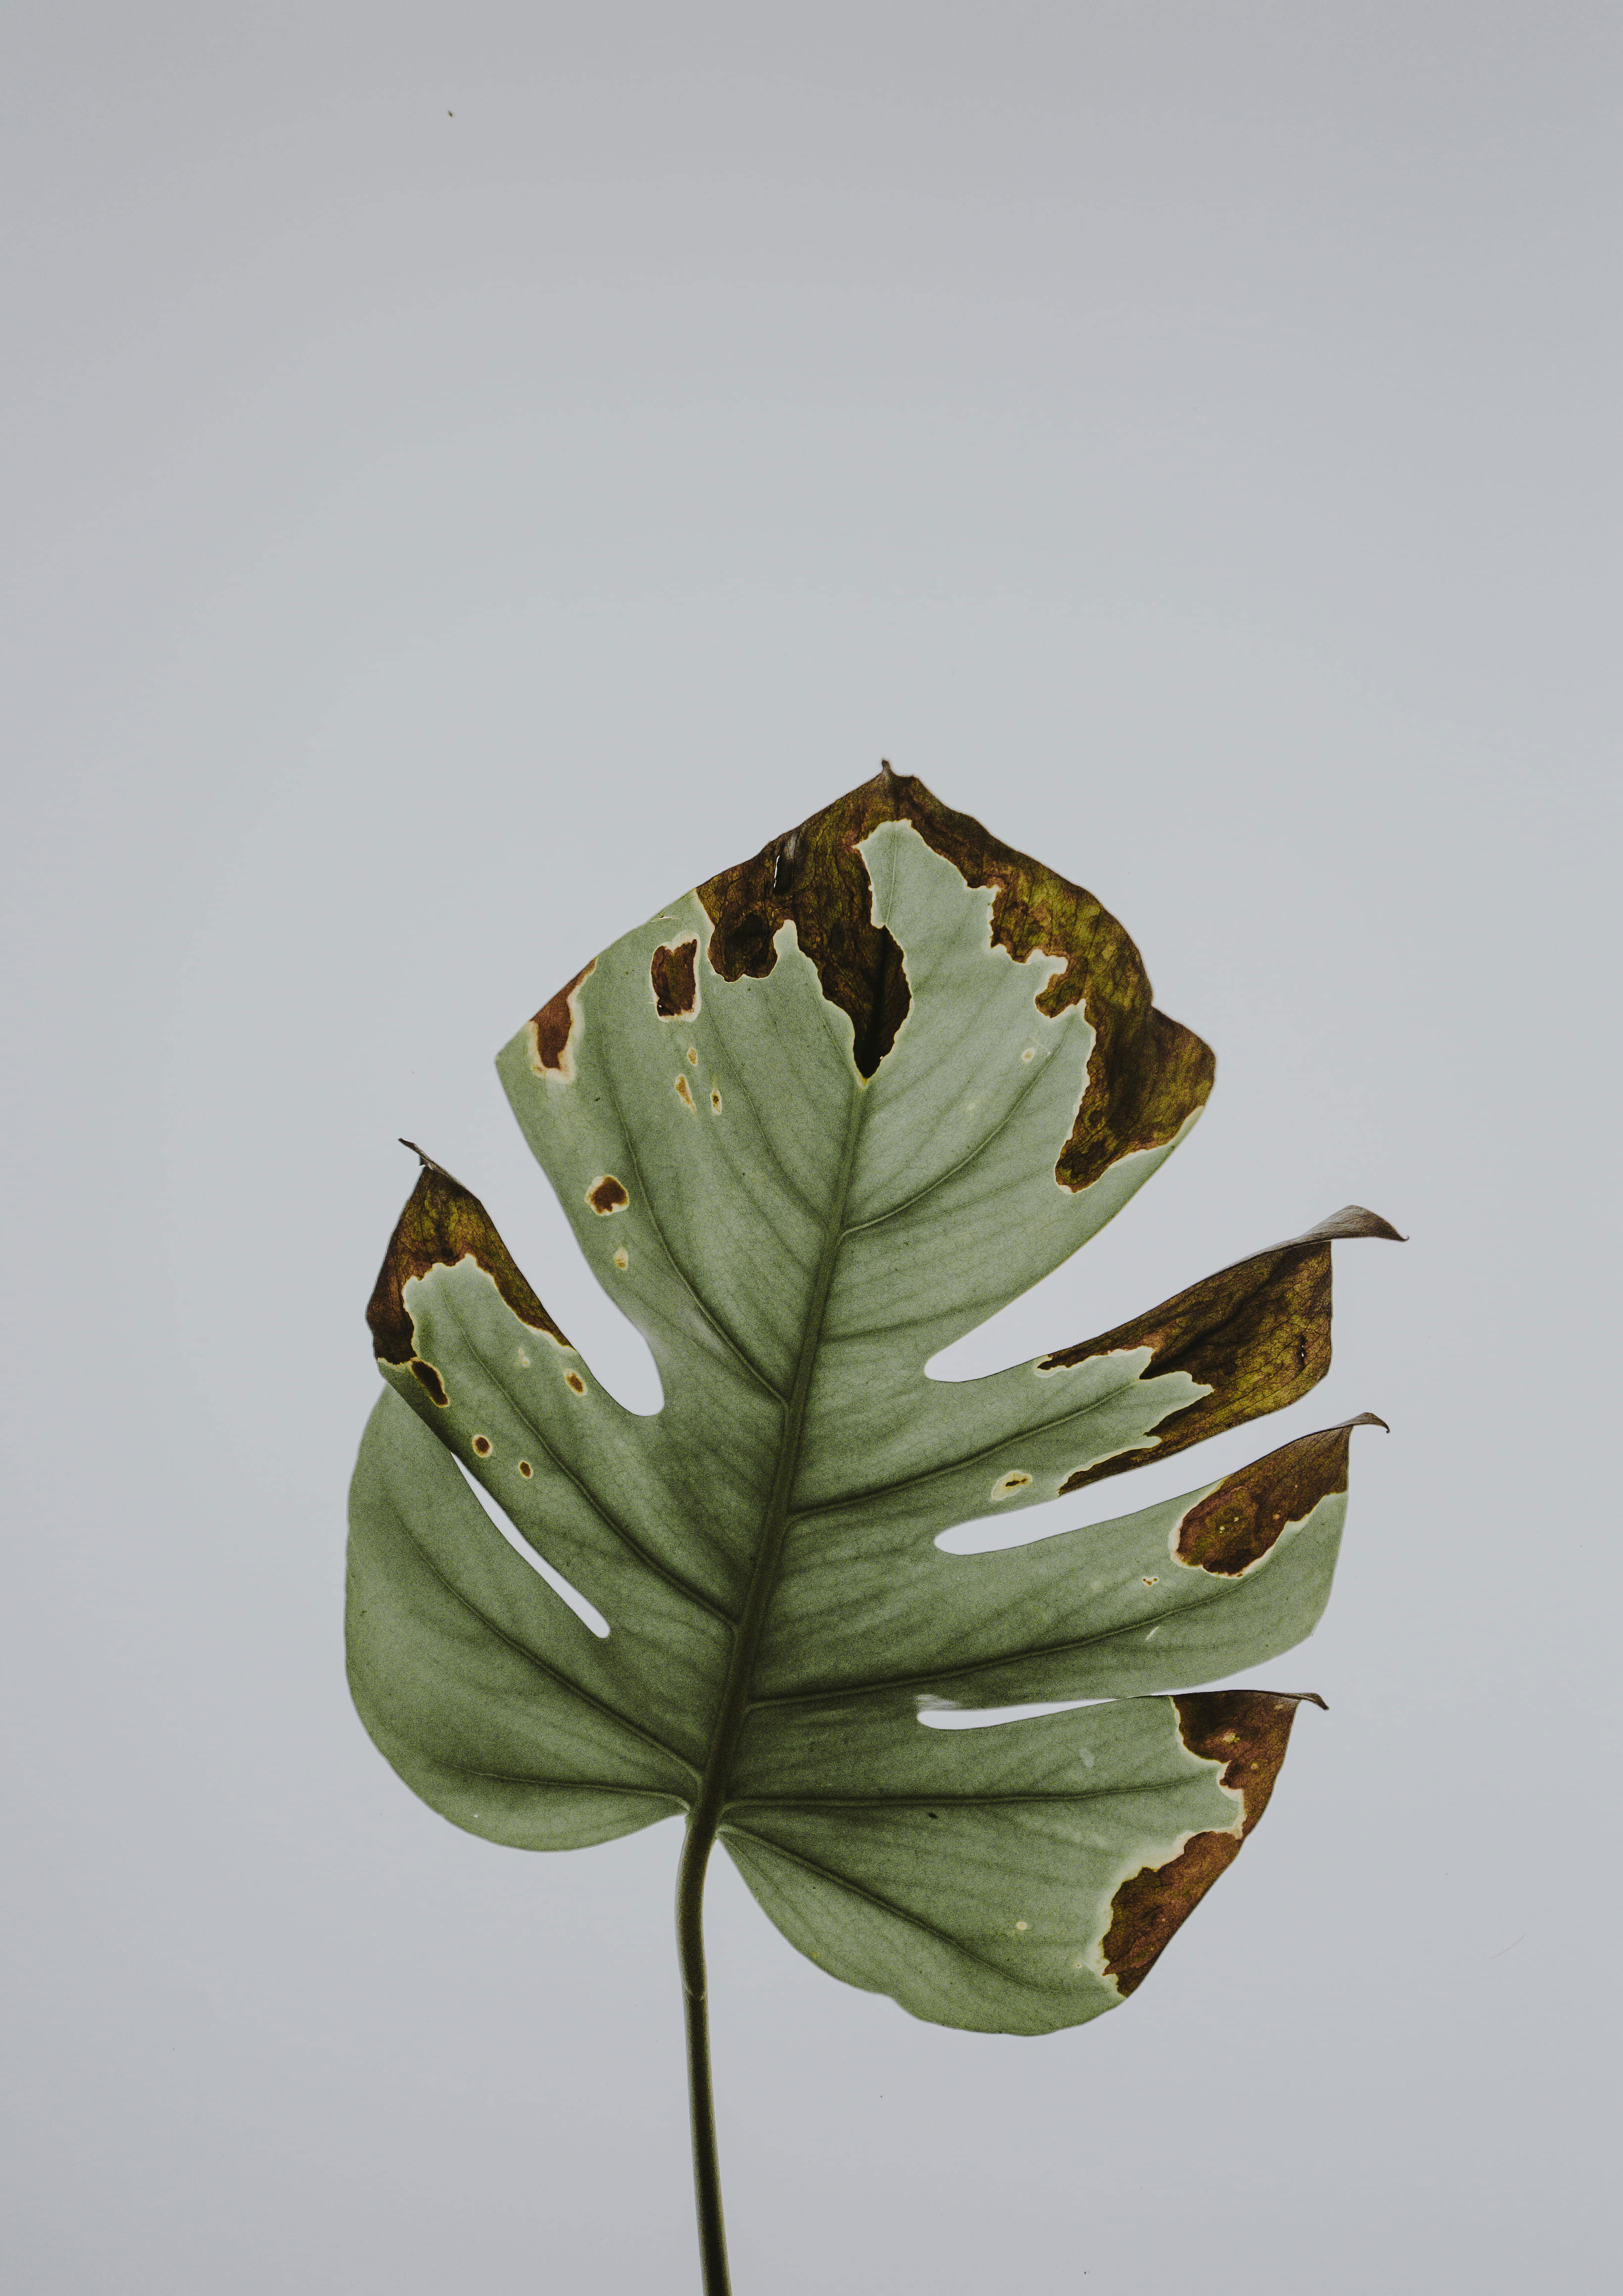 Wallpaper Photo Of Green Leaf, Withered Green Philodendron, Minimal, Minimalist